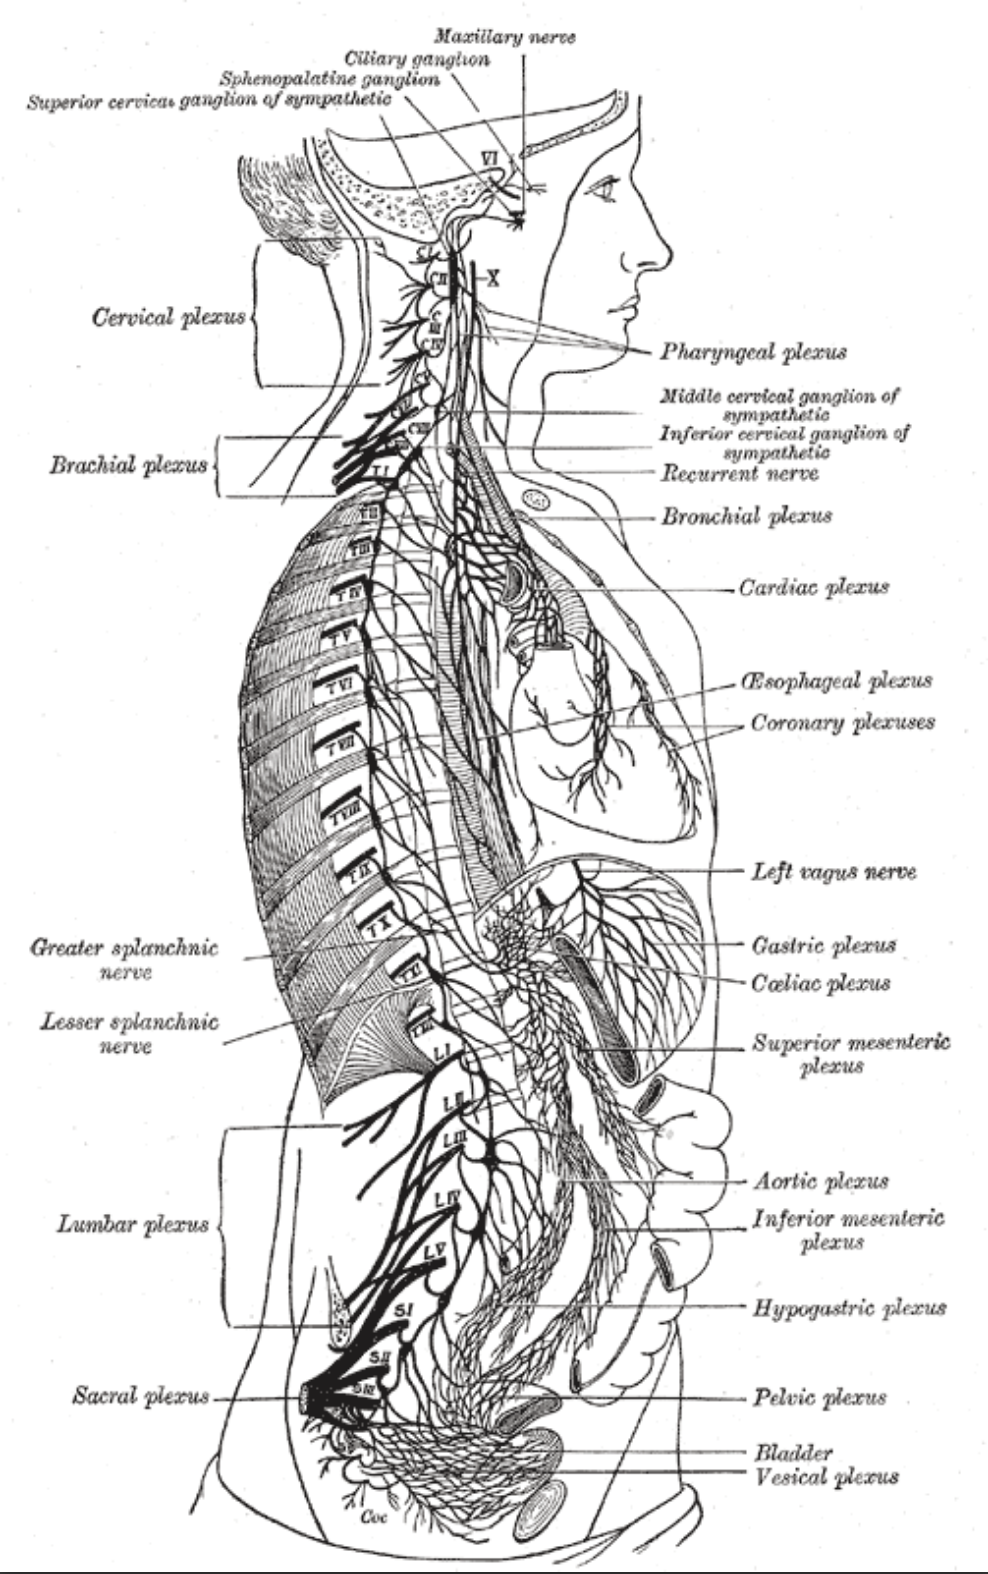 <p>Anatomy of the Right Sympathetic Chain With its Associated Plexuses</p>